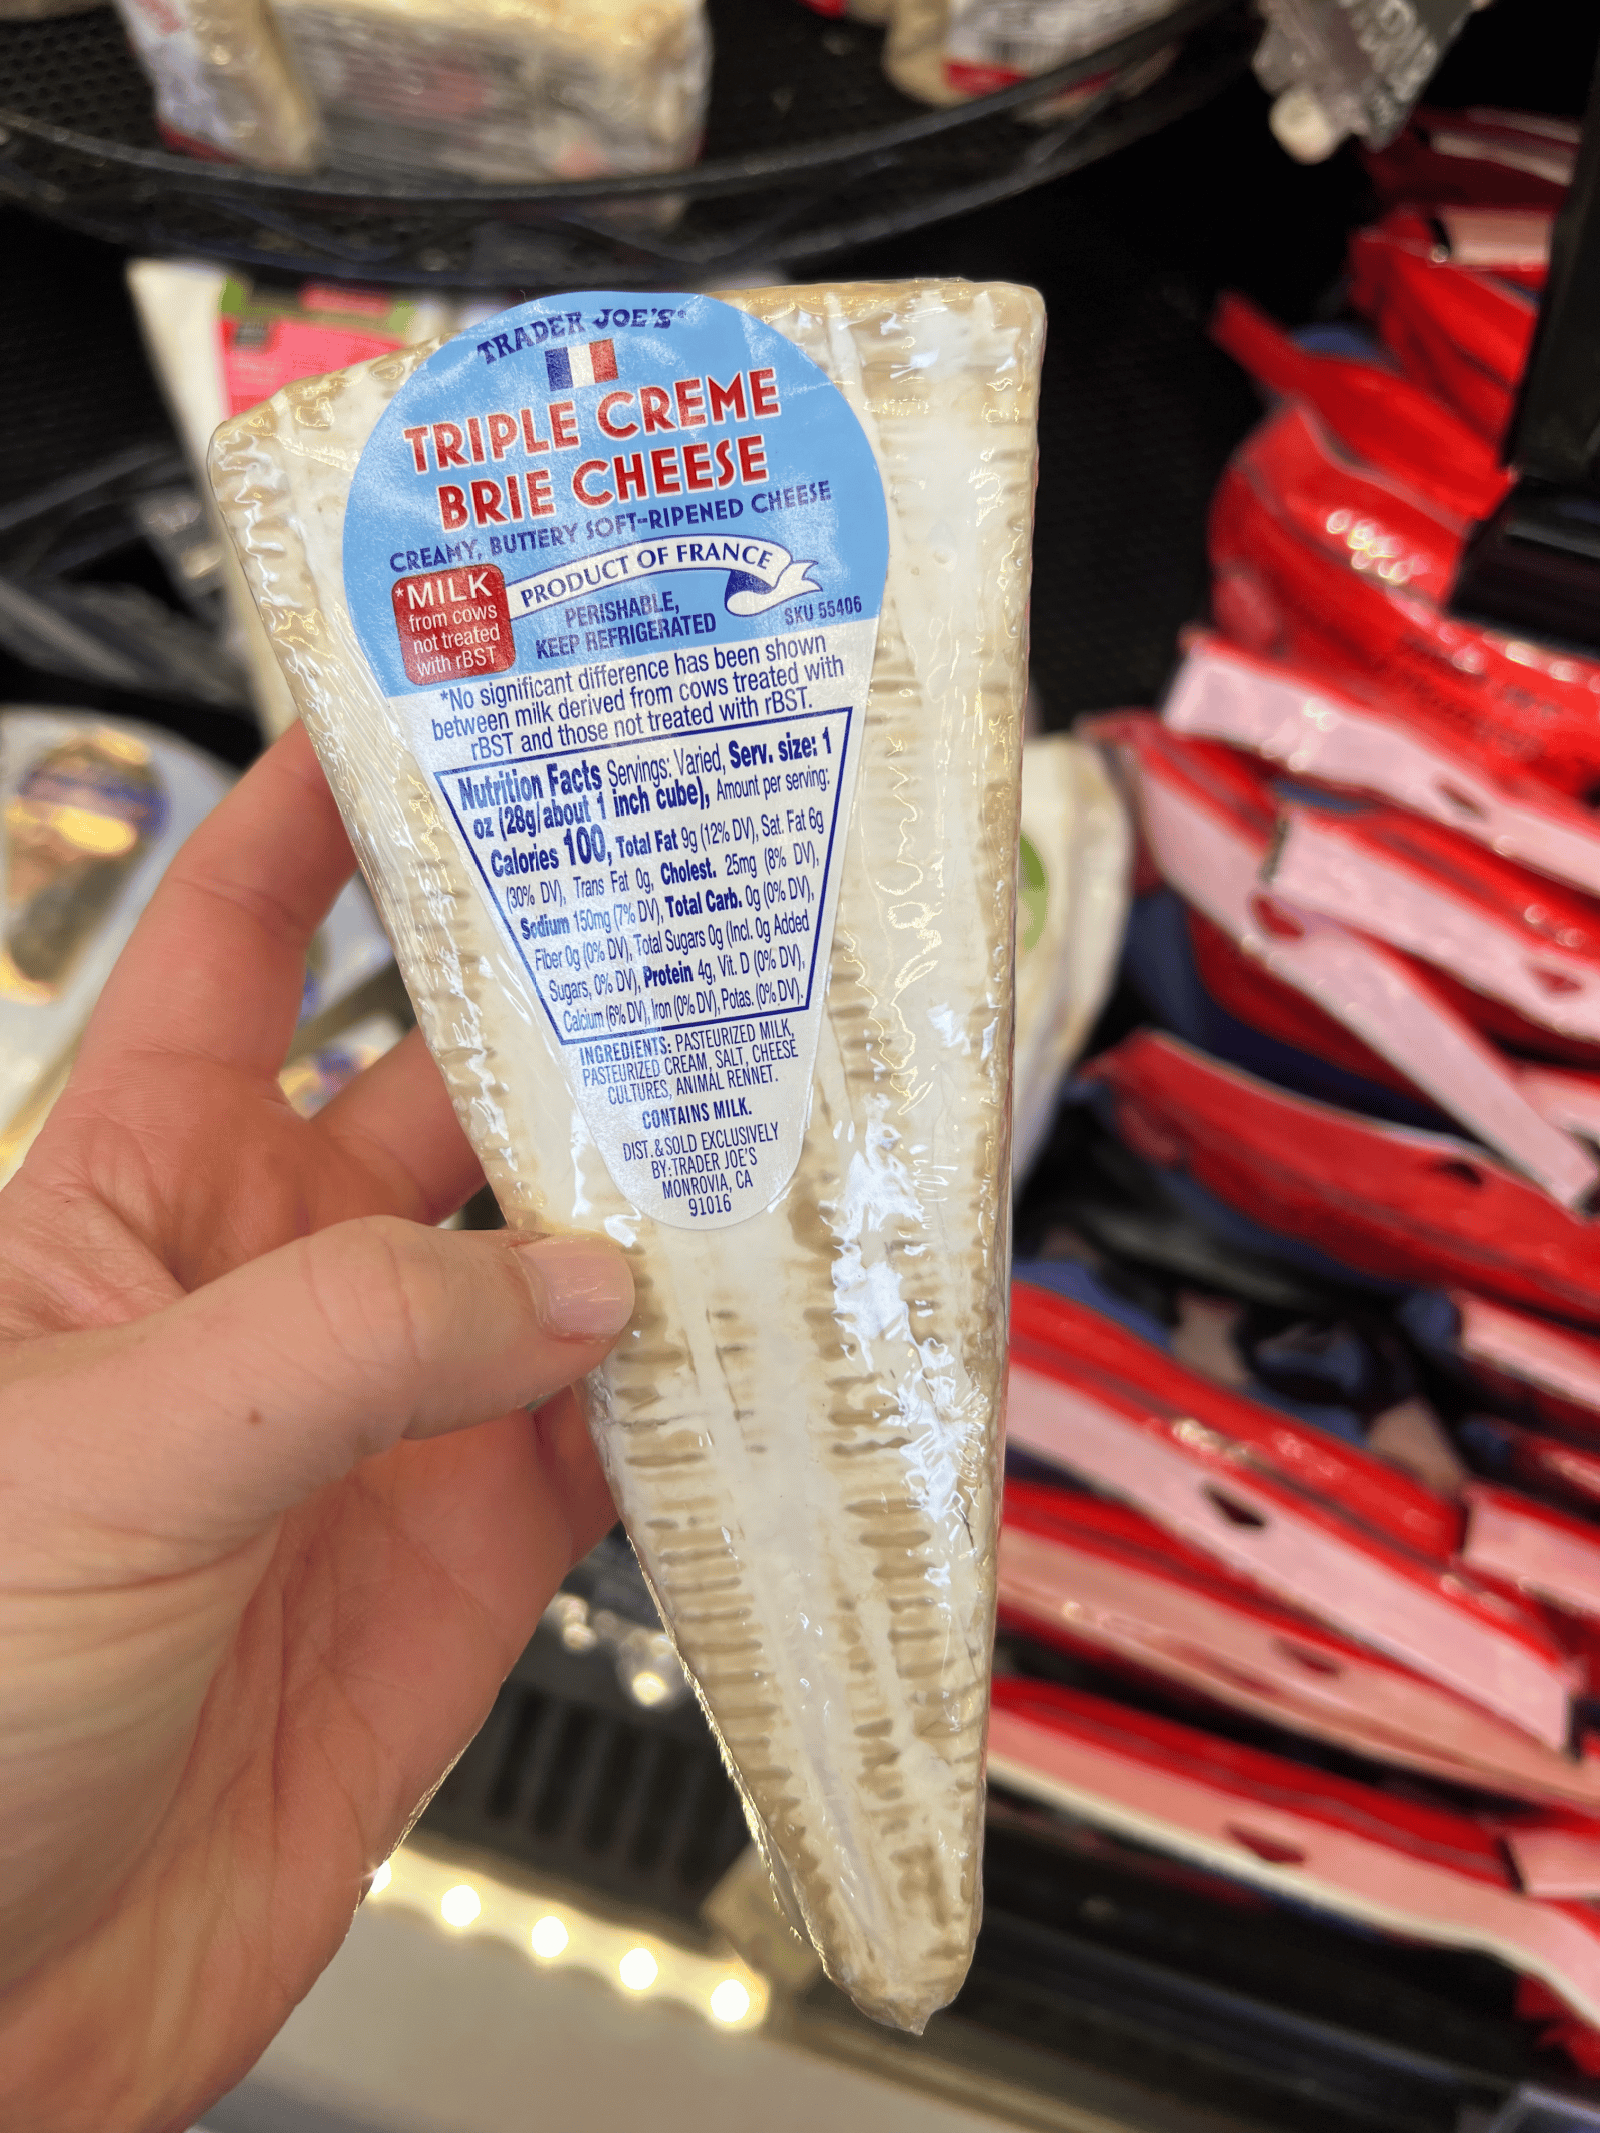 The Best French Items at Trader Joe's